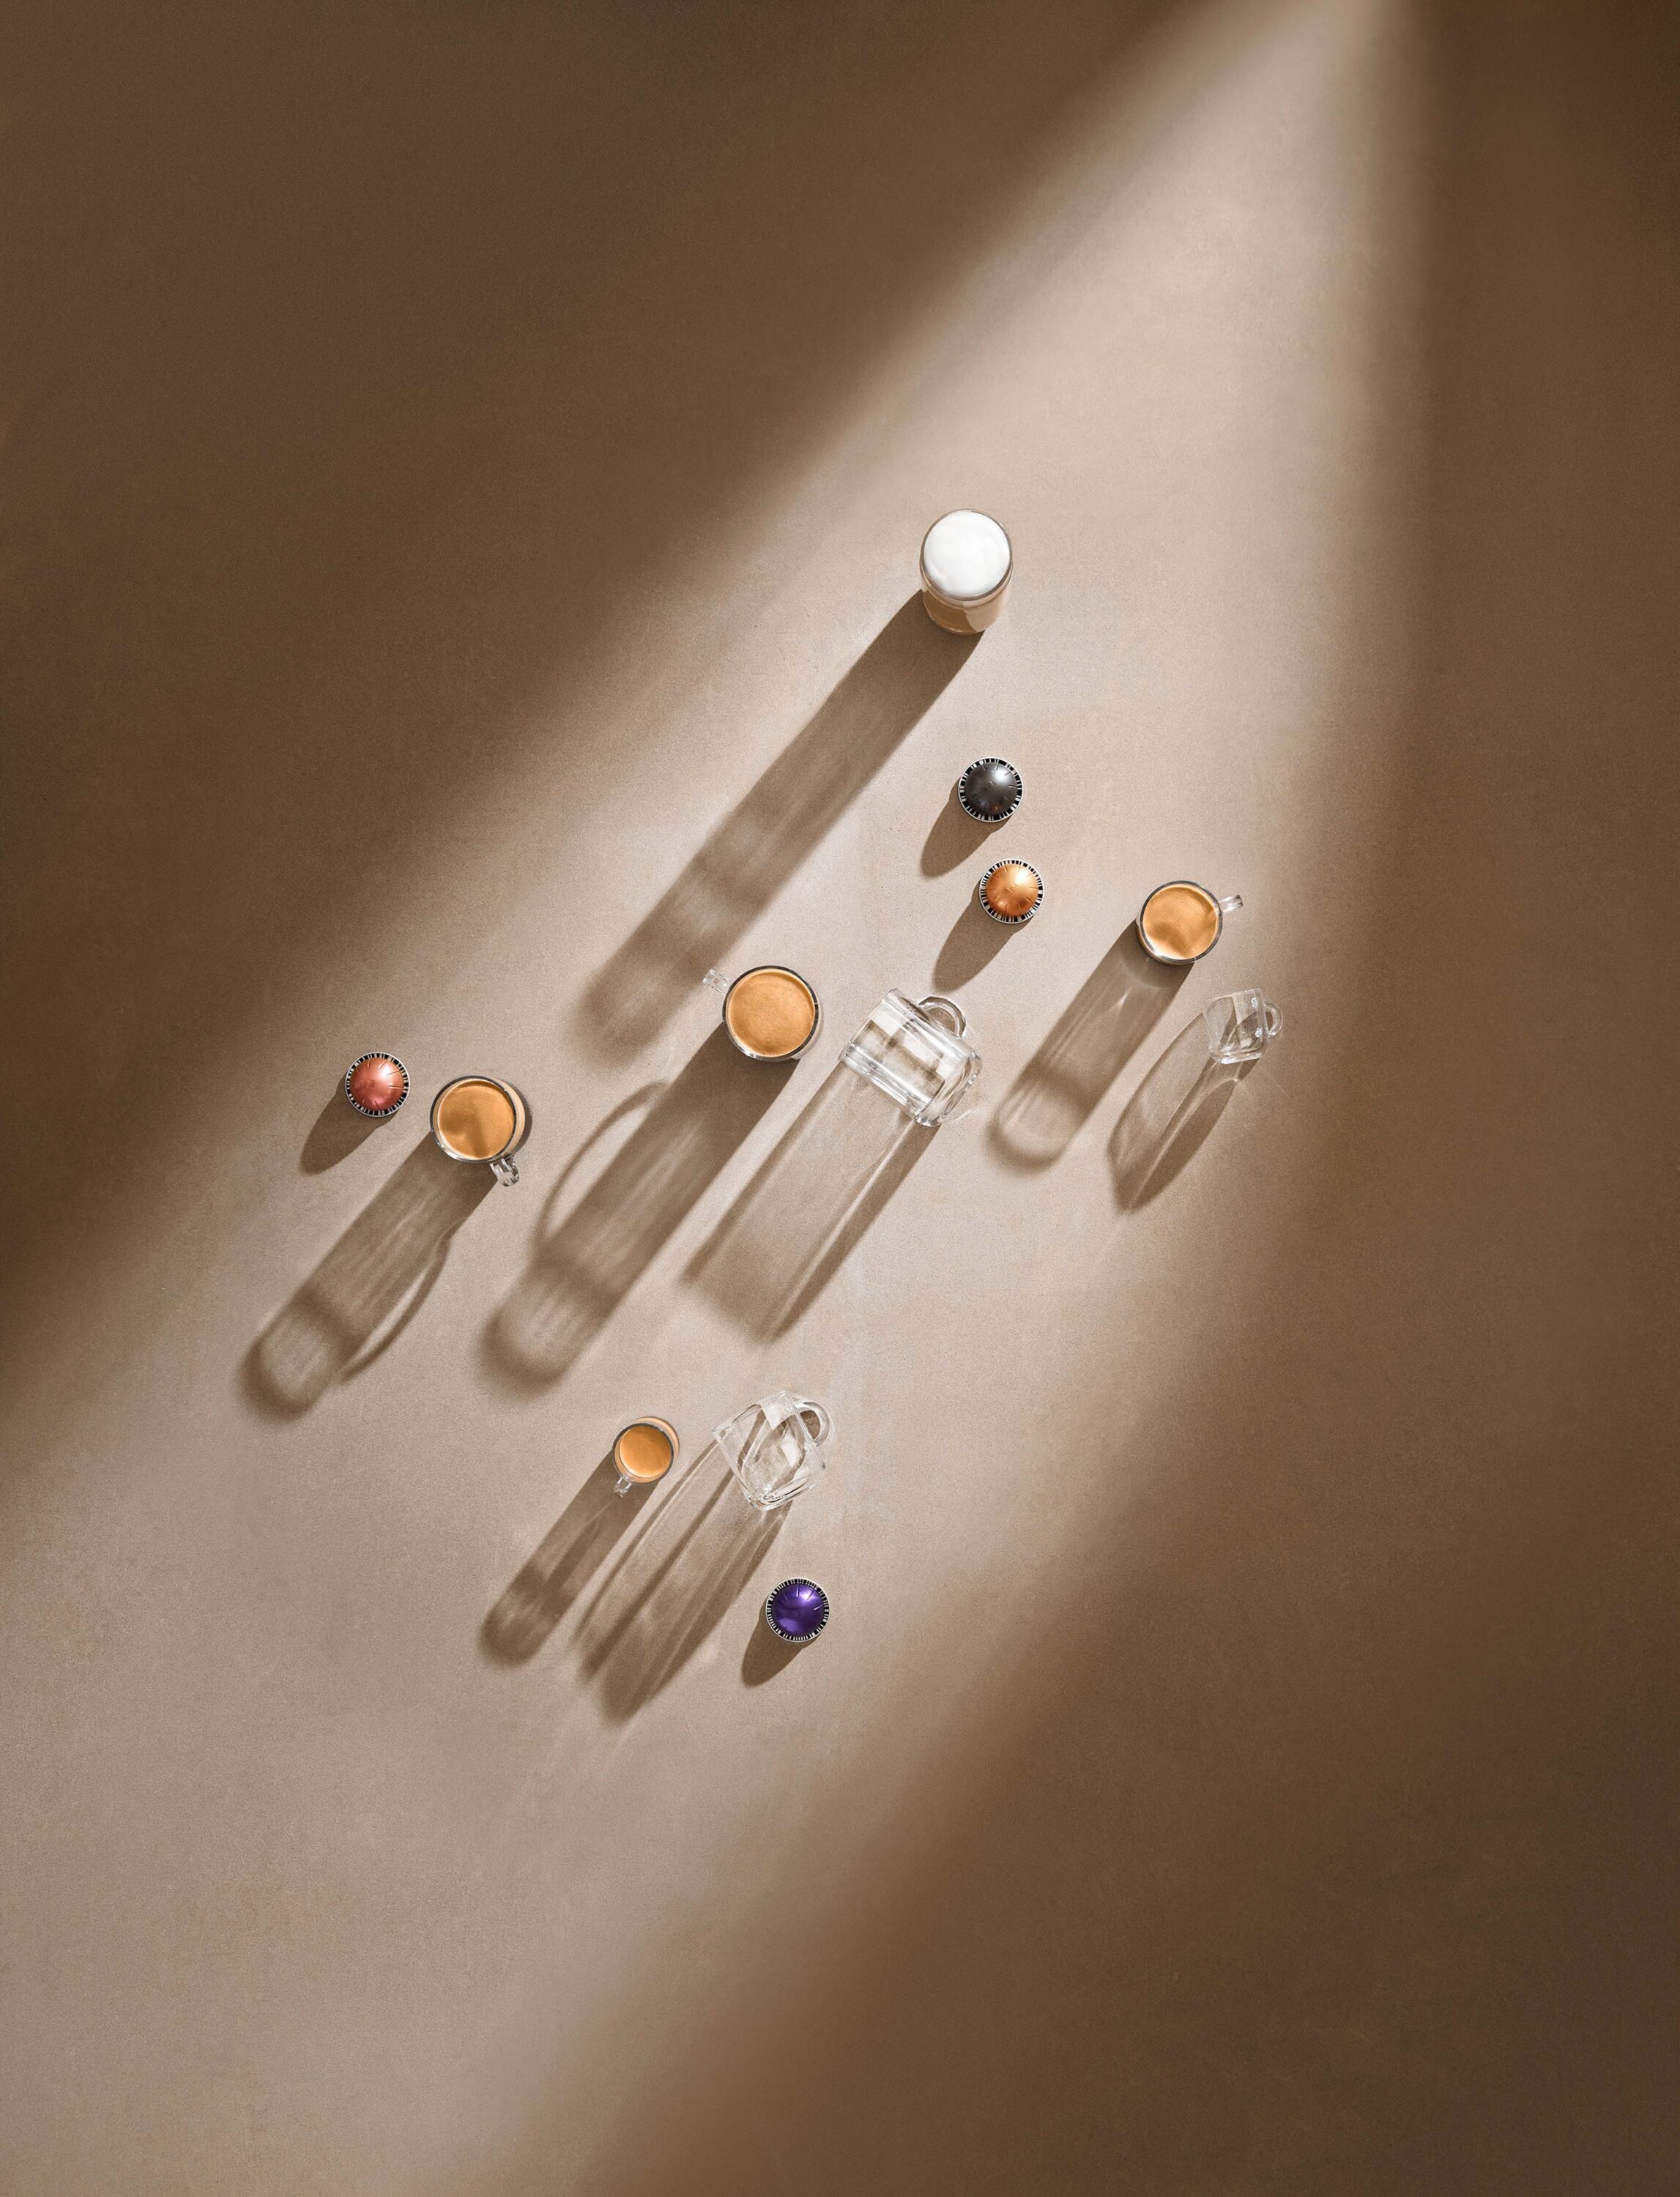 RICHARD_FOSTER_rf4121_Nespresso_Cups_Light_Collection_Vertuo 2